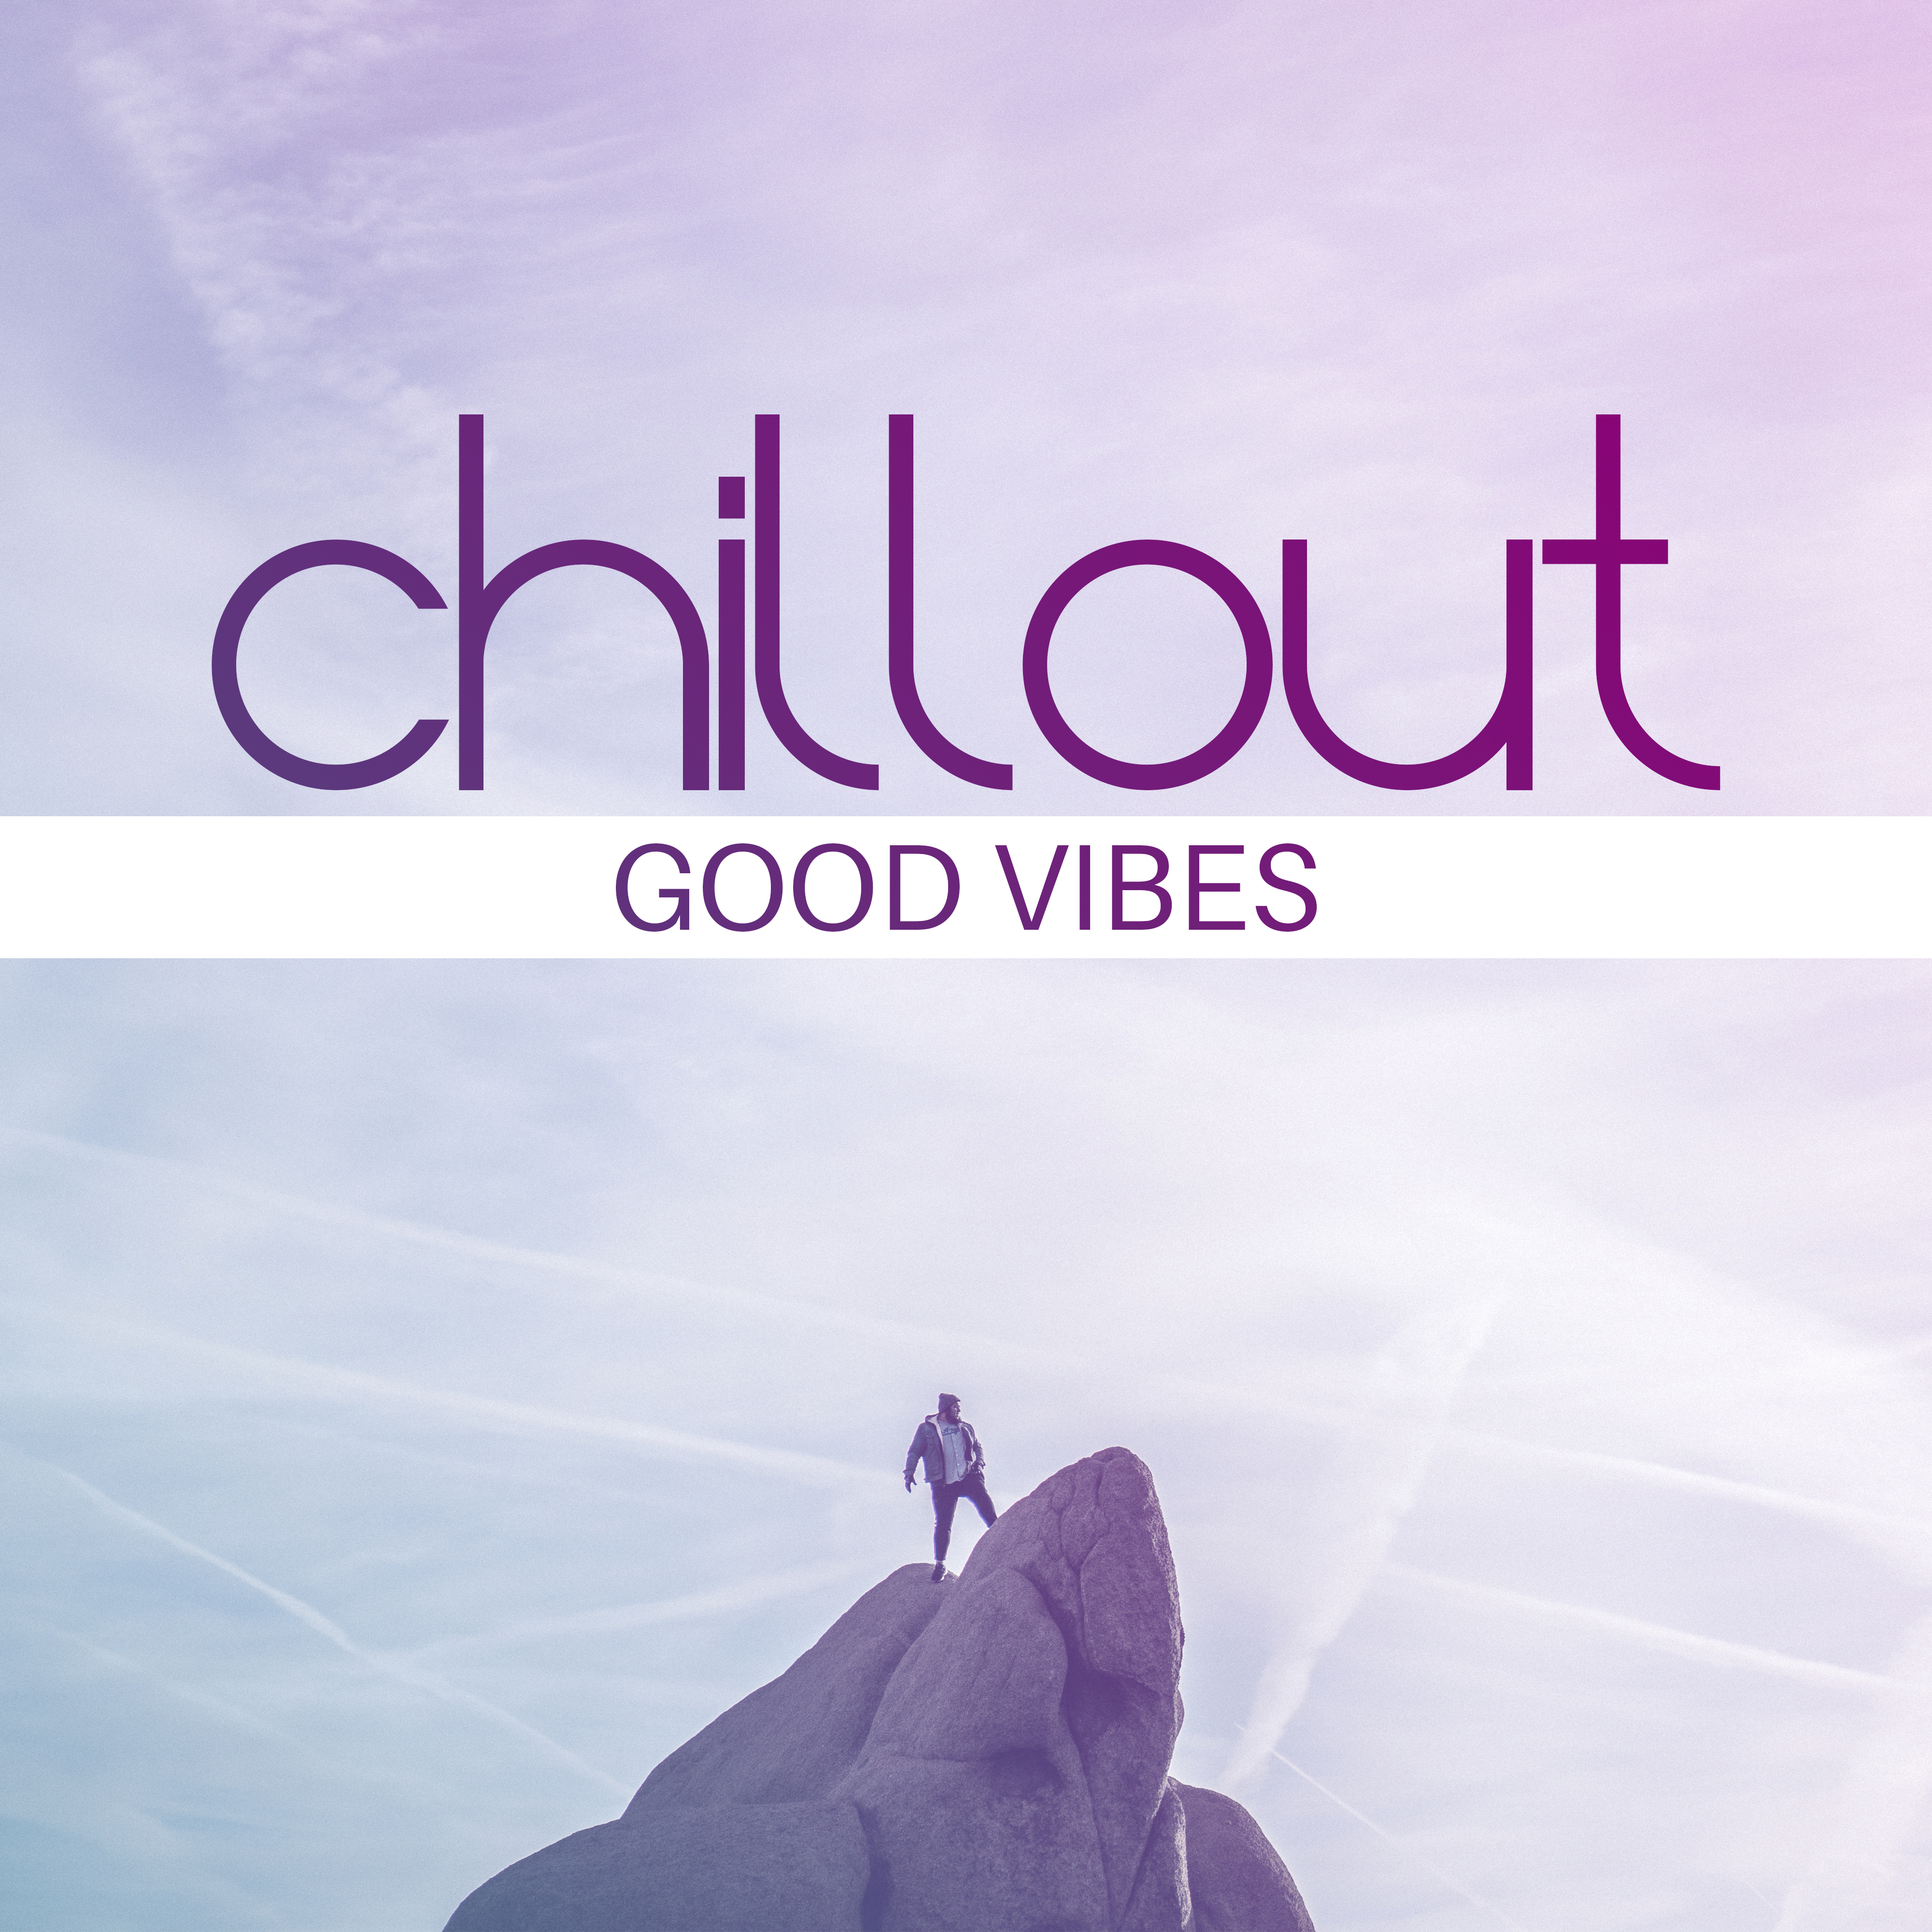 Chillout Good Vibes